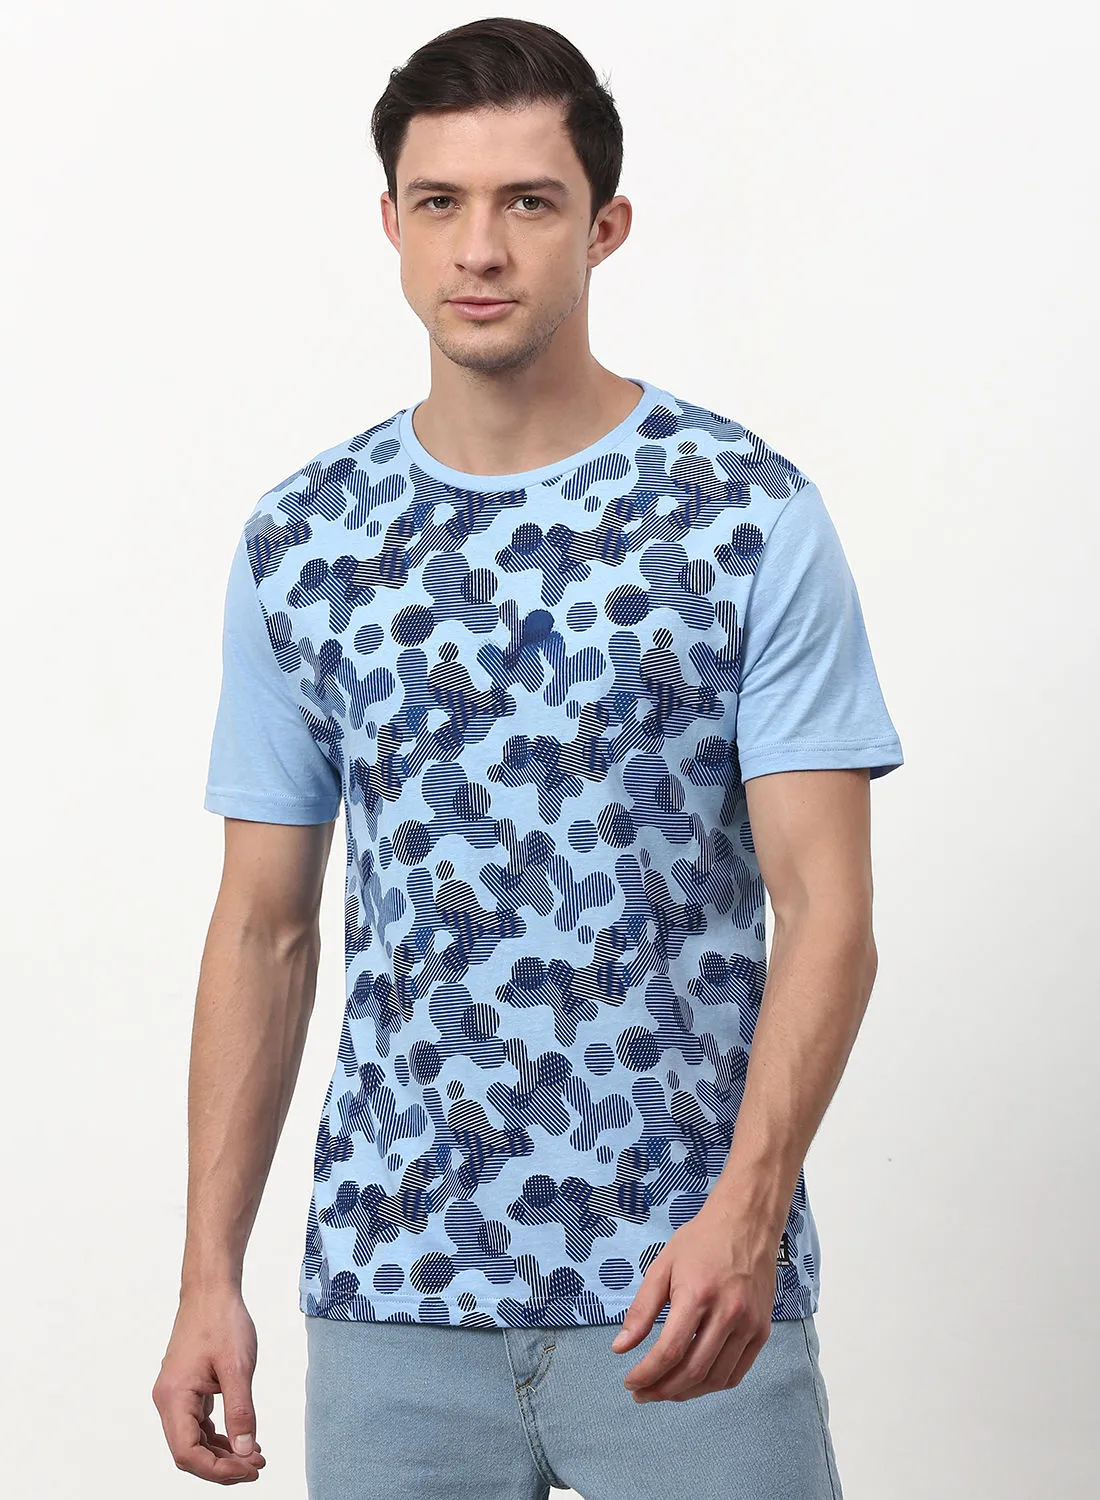 ABOF Front Graphic Printed Regular Fit Crew Neck T-Shirt Very Light Blue